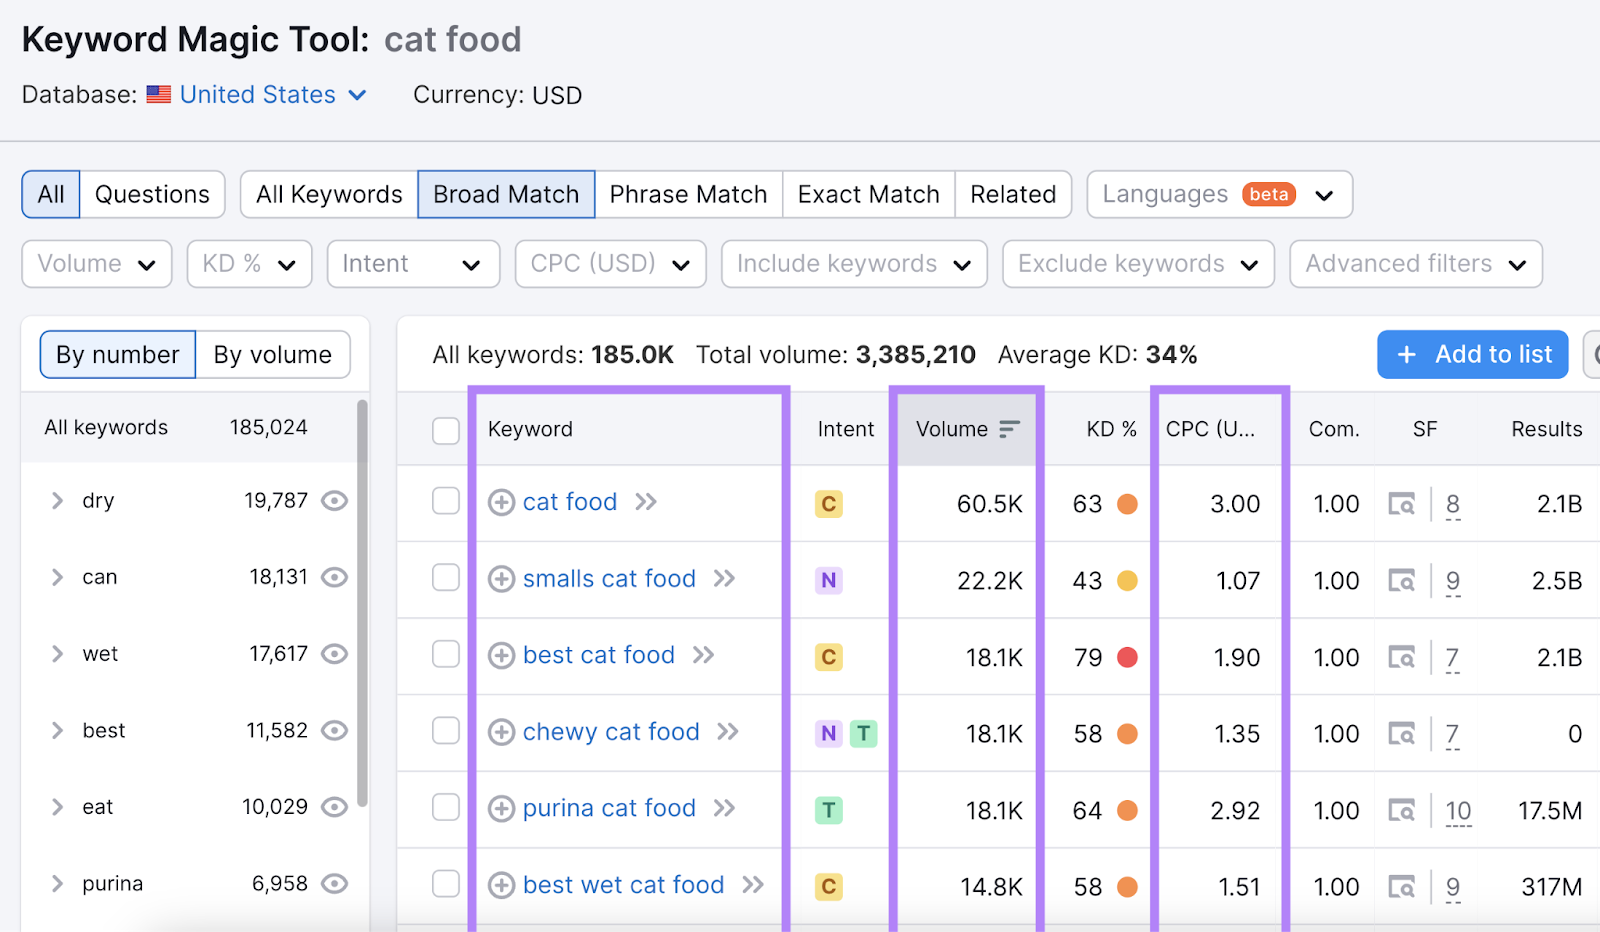 Keyword Magic Tool results for "cat food" with "Keyword," "Volume," and "CPC" columns highlighted